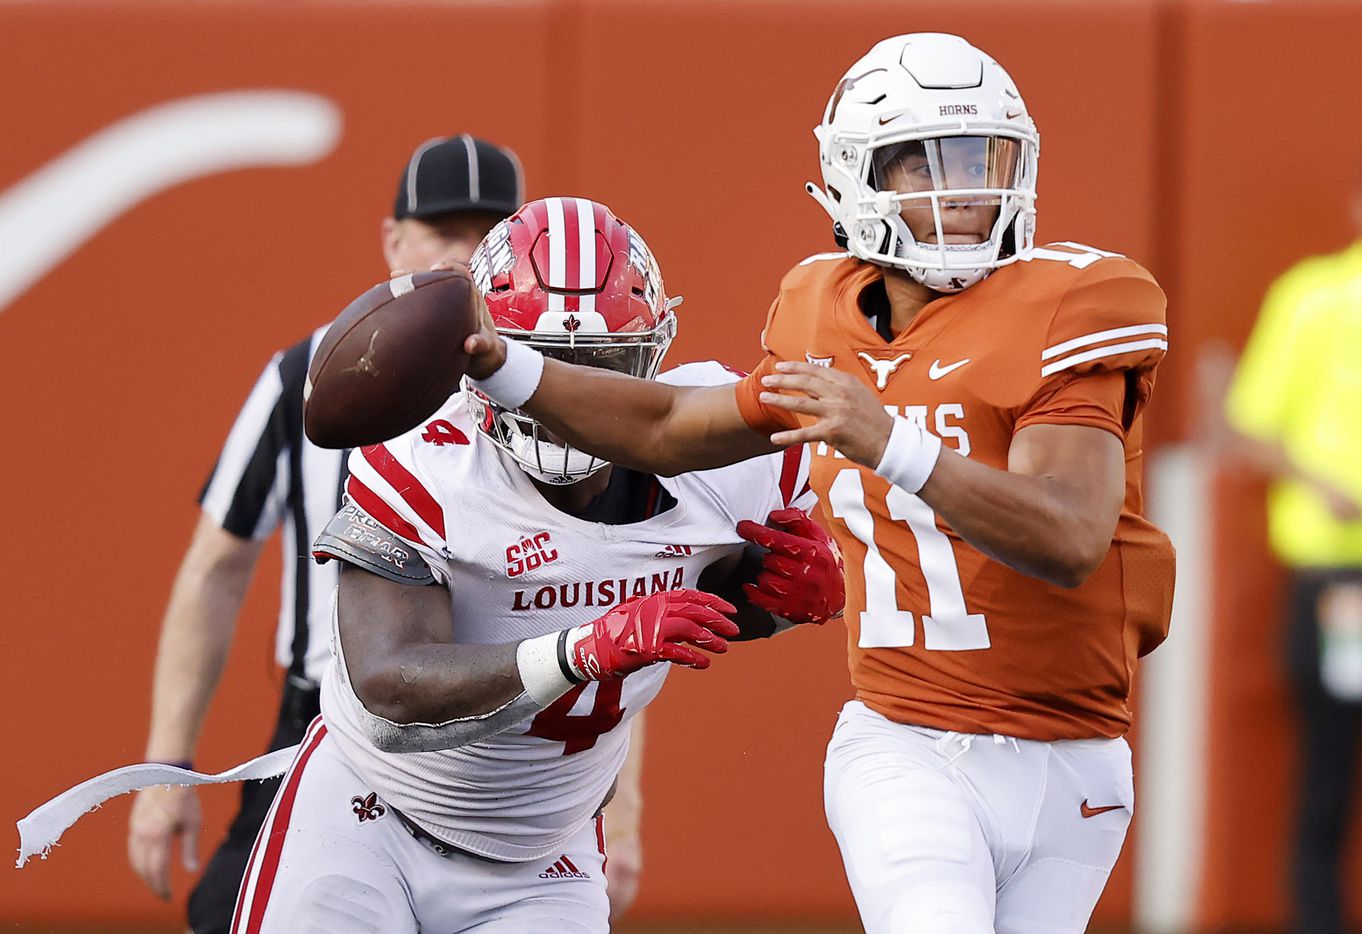 Texas Longhorns quarterback Casey Thompson (11) escapes the pass rush of Louisiana-Lafayette Ragin Cajuns defensive lineman Zi'Yon Hill (4) during the fourth quarter at DKR-Texas Memorial Stadium in Austin, Saturday, September 4, 2021. (Tom Fox/The Dallas Morning News)